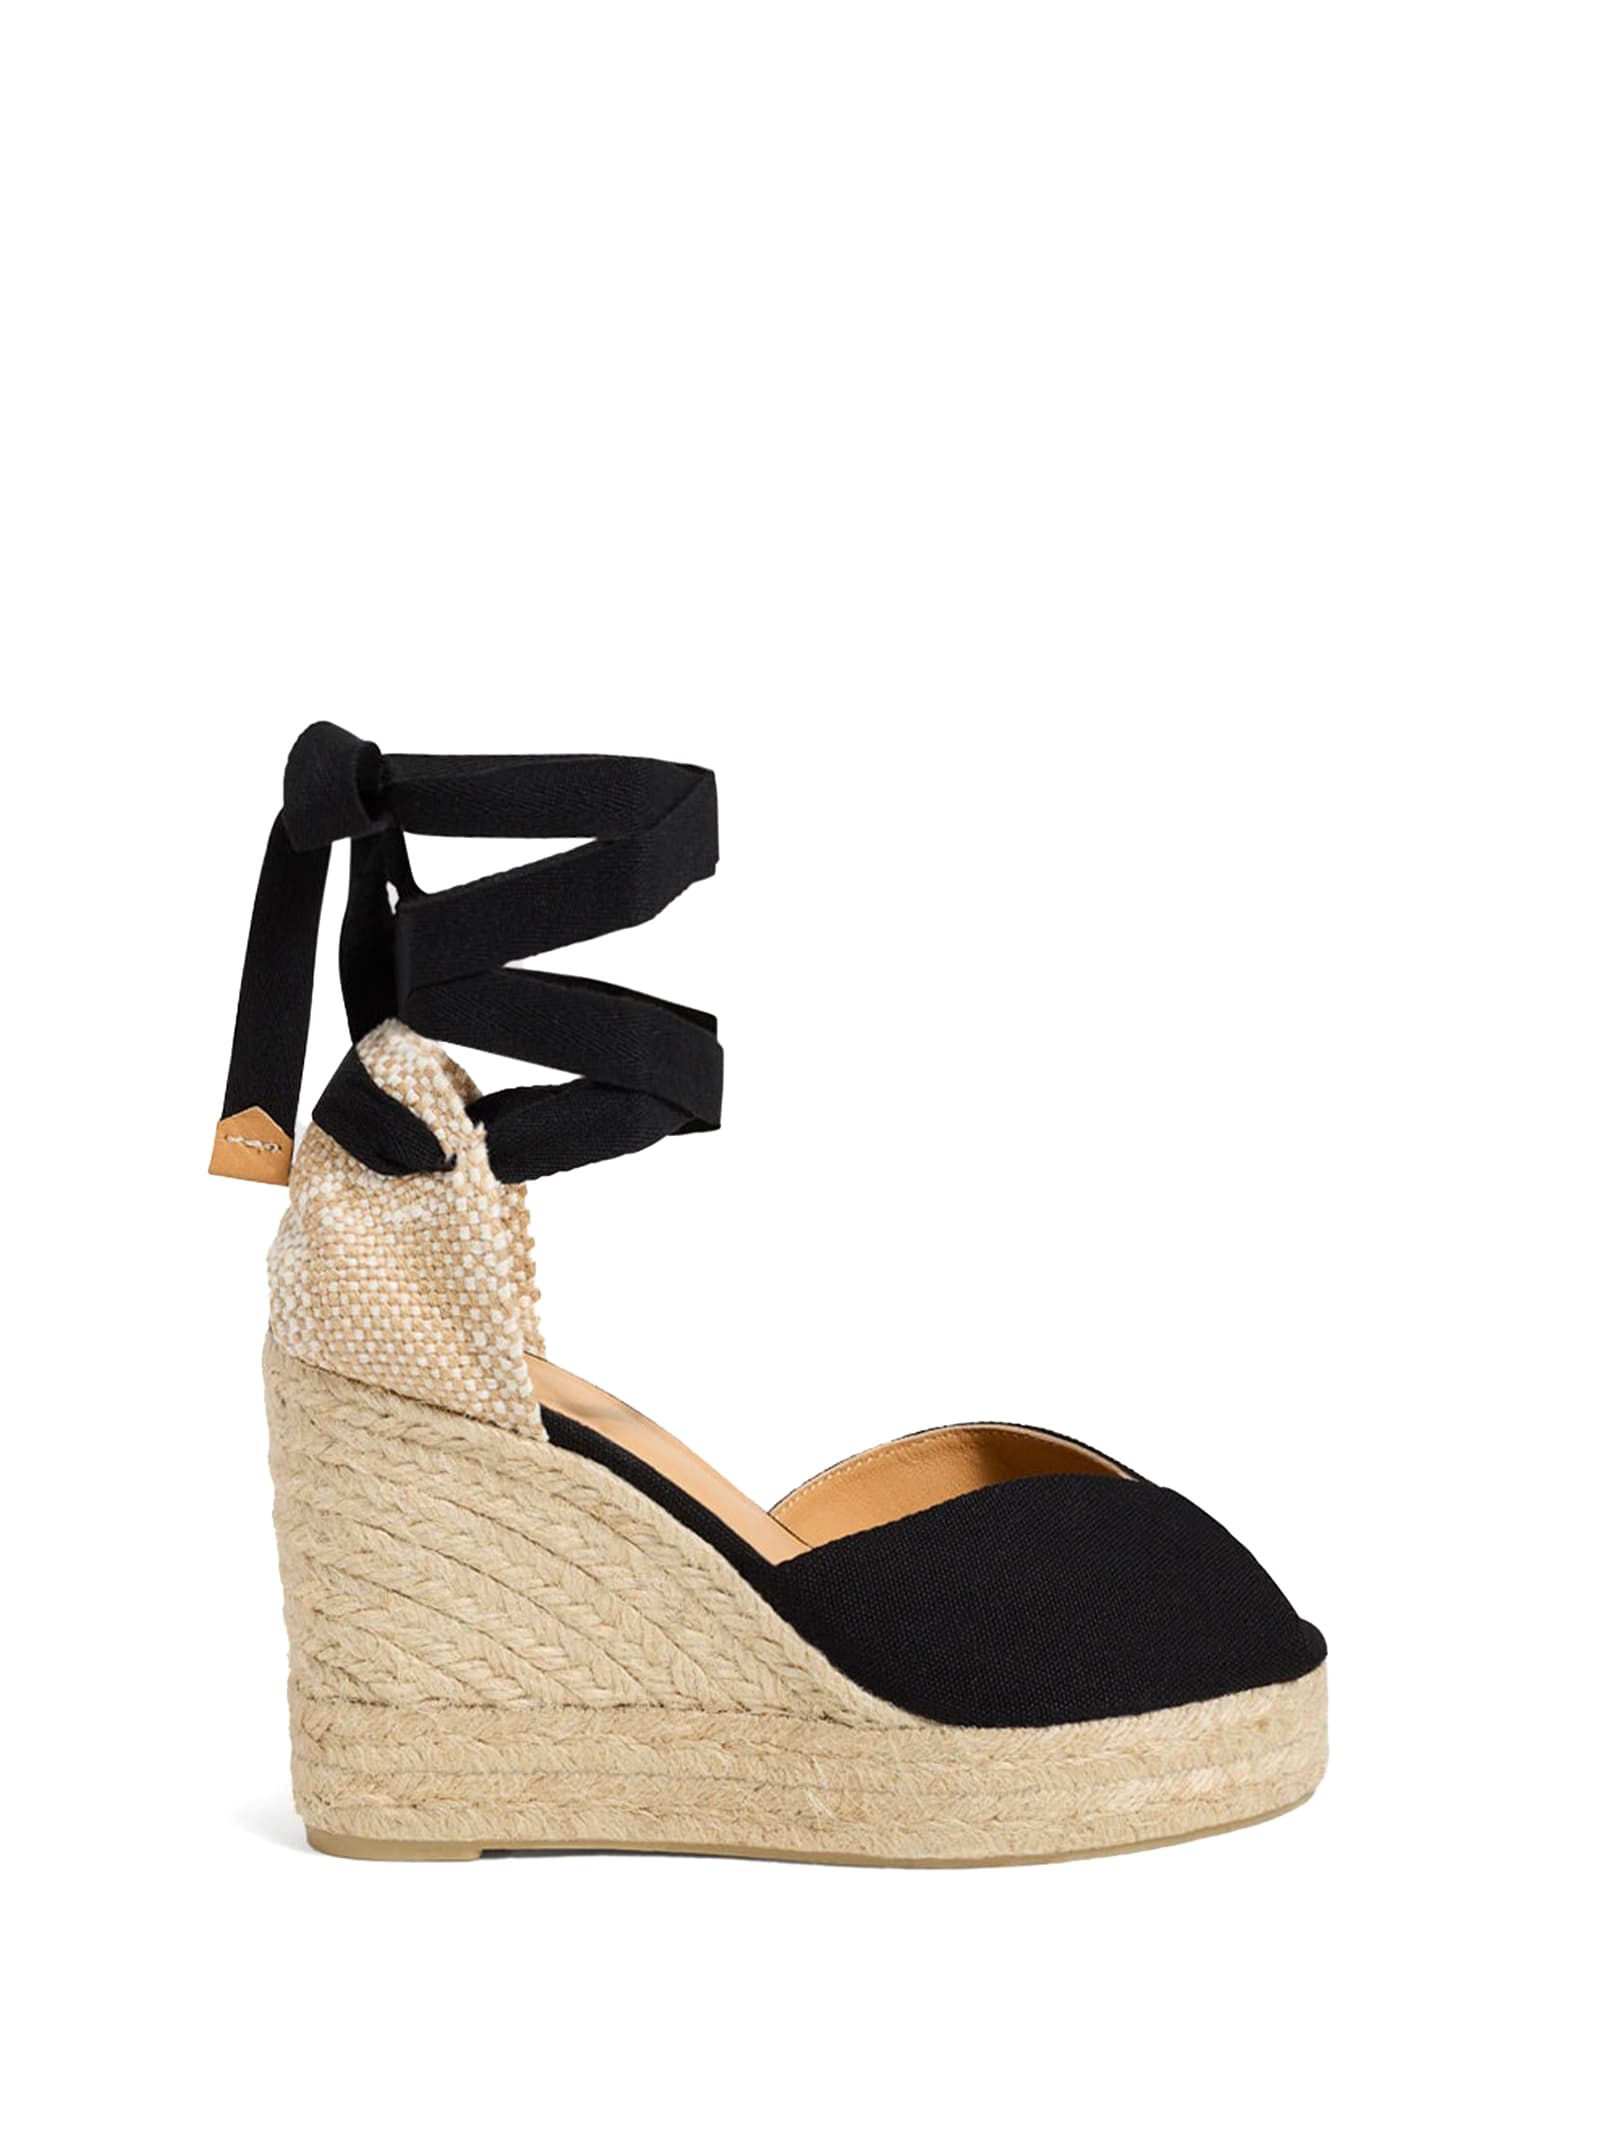 Castañer Espadrilles Bilina Open With Laces At The Ankle